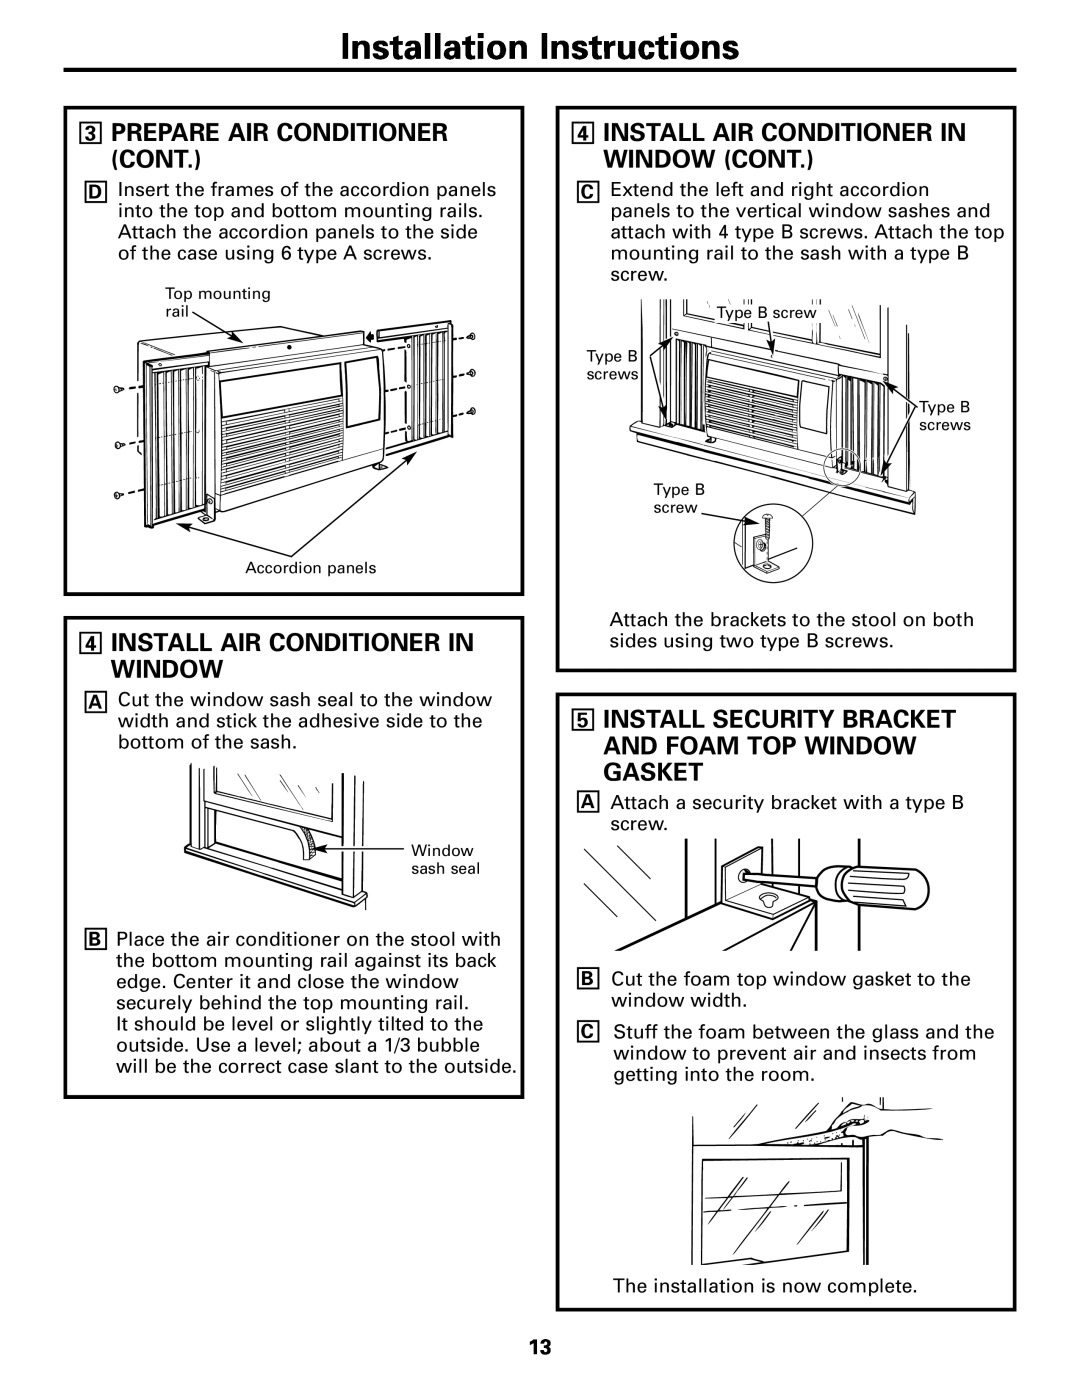 GE ASN05, ASN06, ASL06, ASL05 Installation Instructions, 3PREPARE AIR CONDITIONER CONT, 4INSTALL AIR CONDITIONER IN WINDOW 